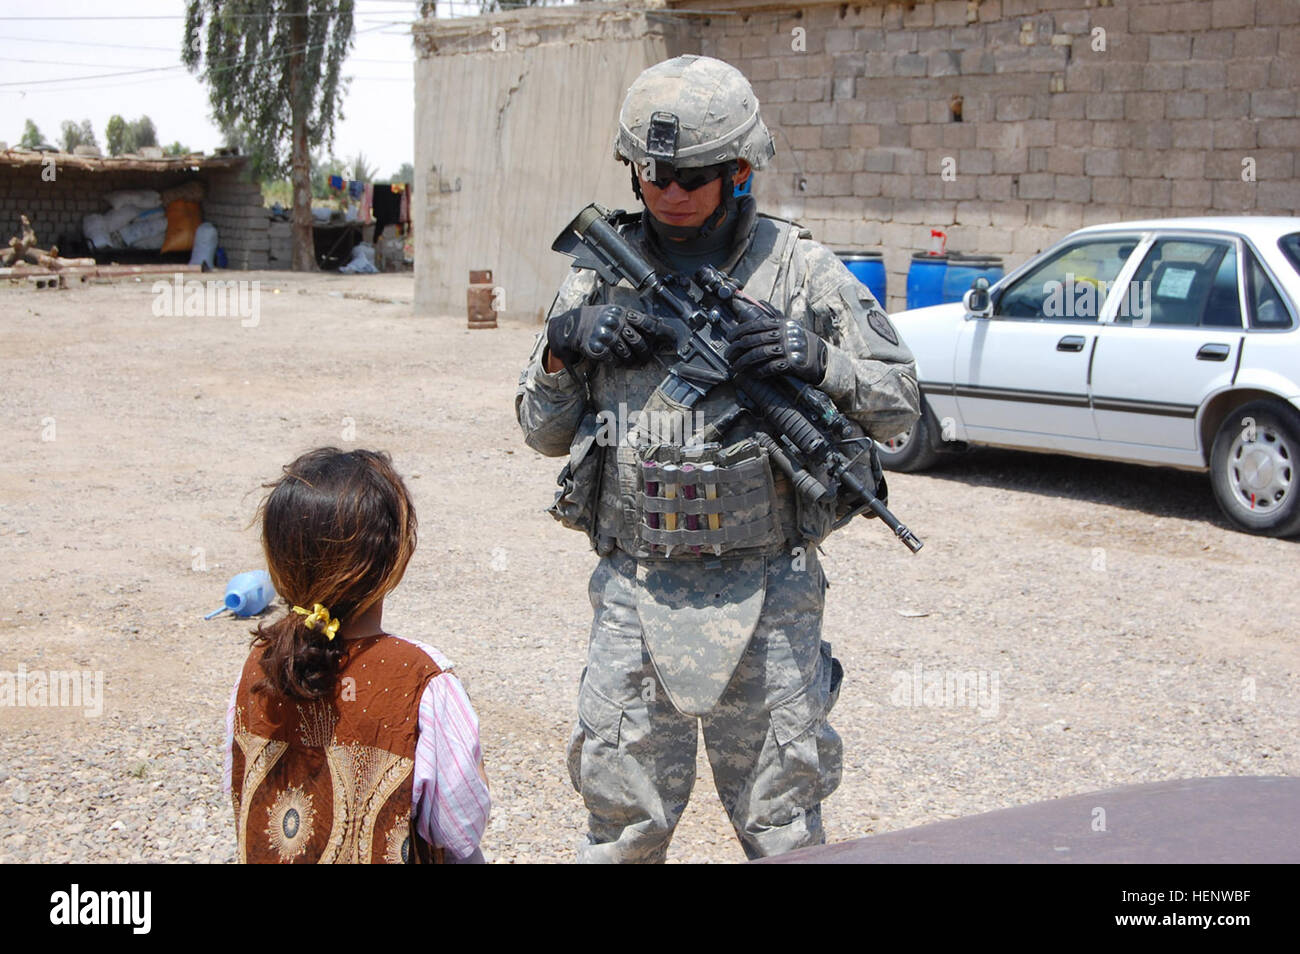 Spc. Austin Sandoval, a Lukachukai, Ariz., native, talks with an Iraqi girl while on patrol the East Anbar province, northwest of Baghdad, May 11. Sandoval is a mortarman assigned to Headquarters and Headquarters Company, 1st Battalion, 27th Infantry Regiment "Wolfhounds," 2nd Stryker Brigade Combat Team "Warrior," 25th Infantry Division, Multi-National Division - Baghdad. (U.S. Army photo/Staff Sgt. J.B. Jaso III) Securing safe place for Iraq's future 88834 Stock Photo